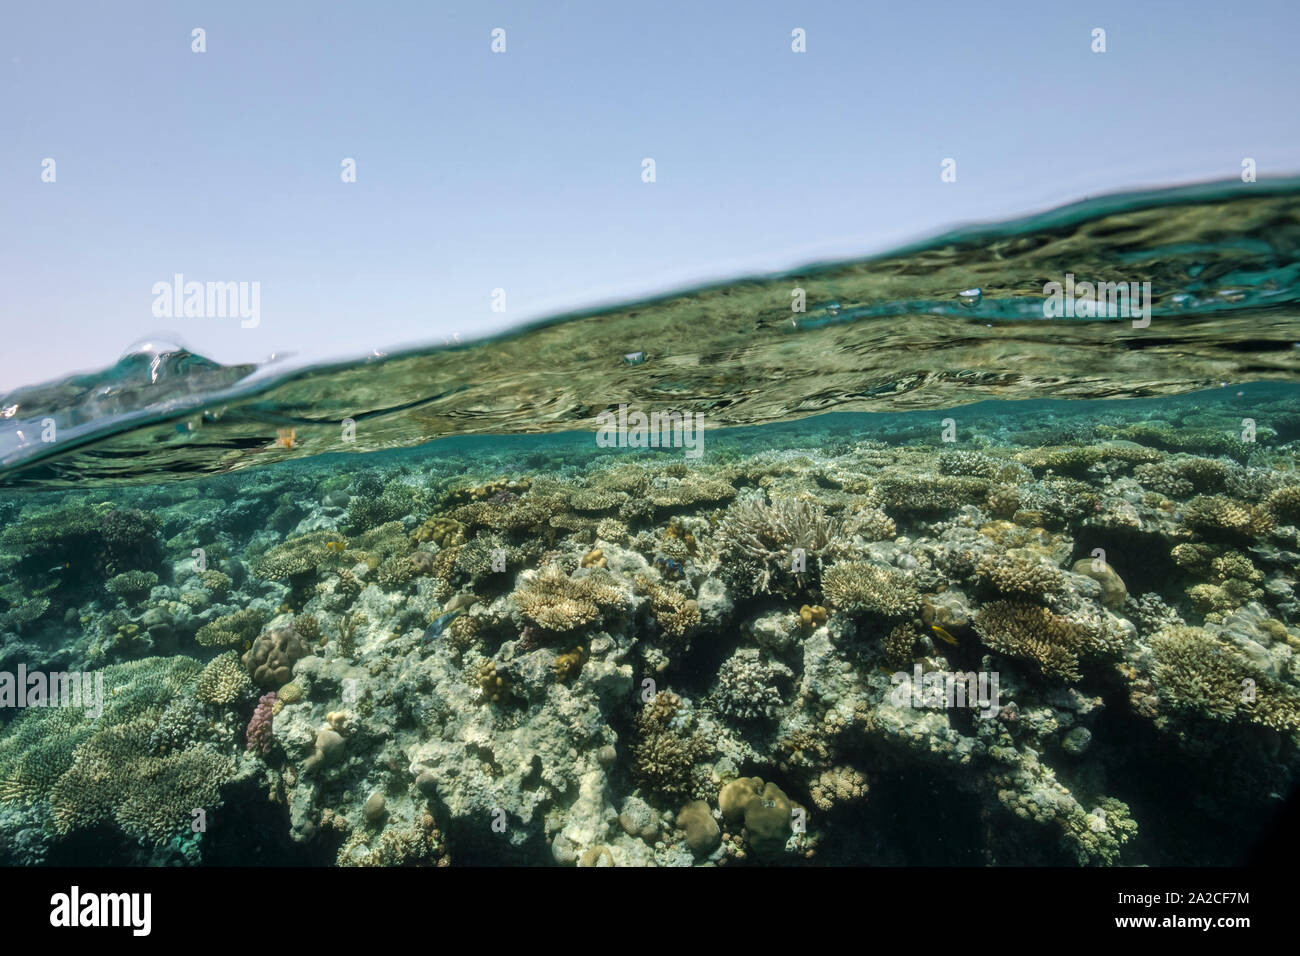 Over under coral reef Red Sea Stock Photo